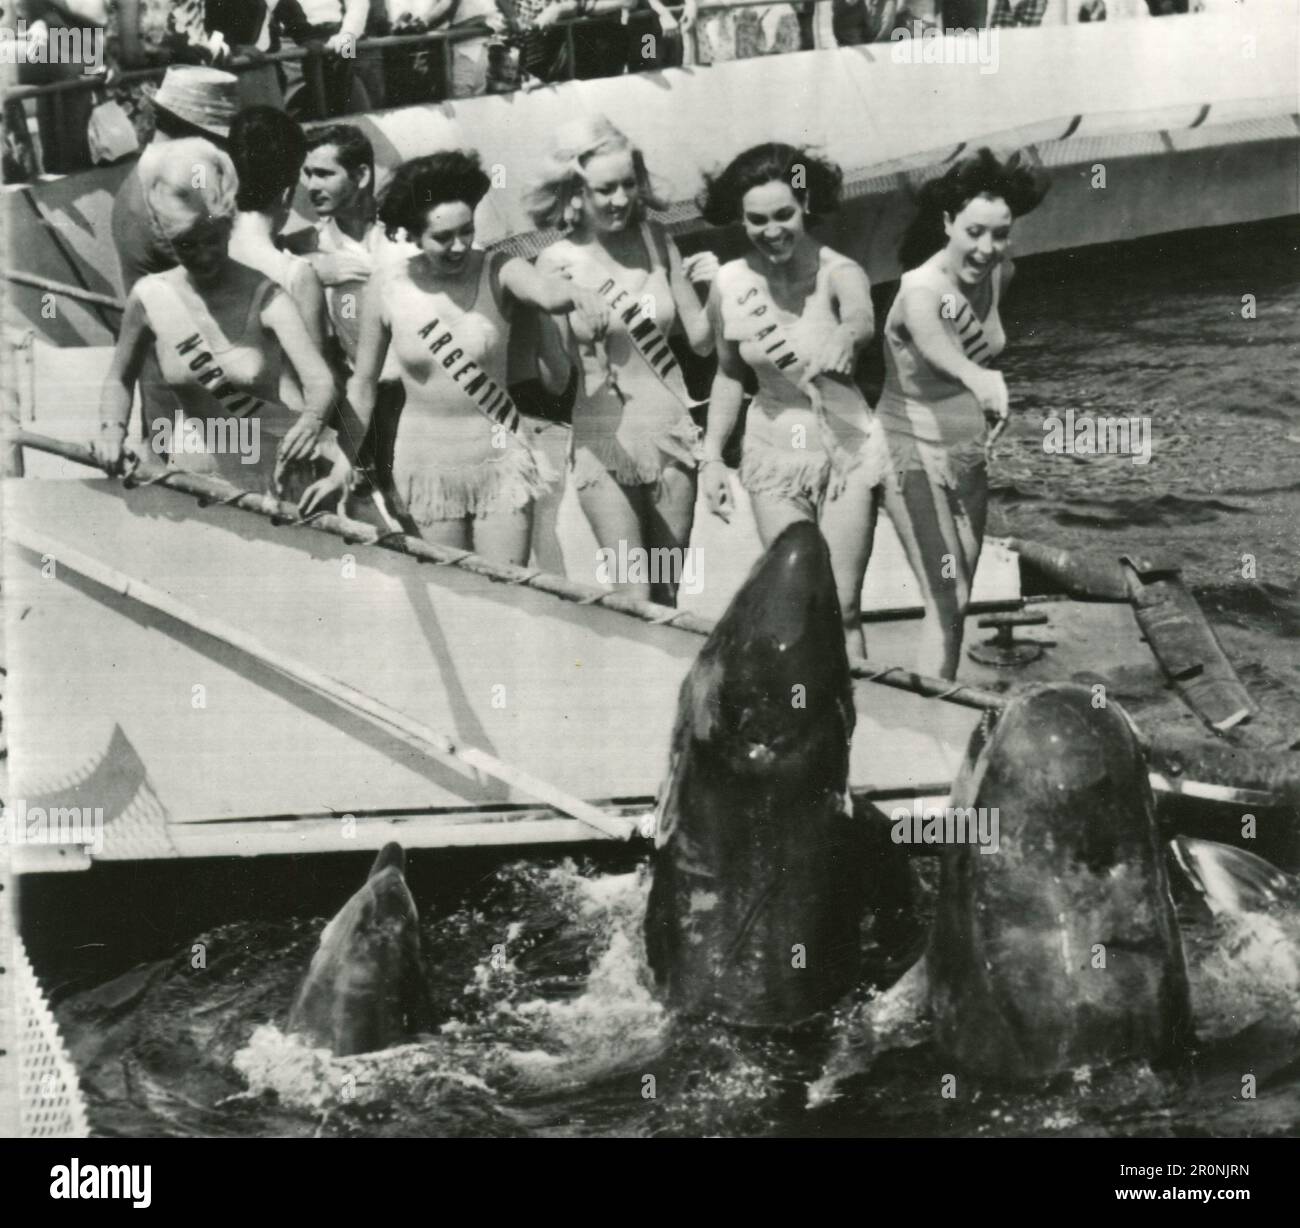 The girls of the world beauty contest feeding the dalphins, 1950s Stock Photo